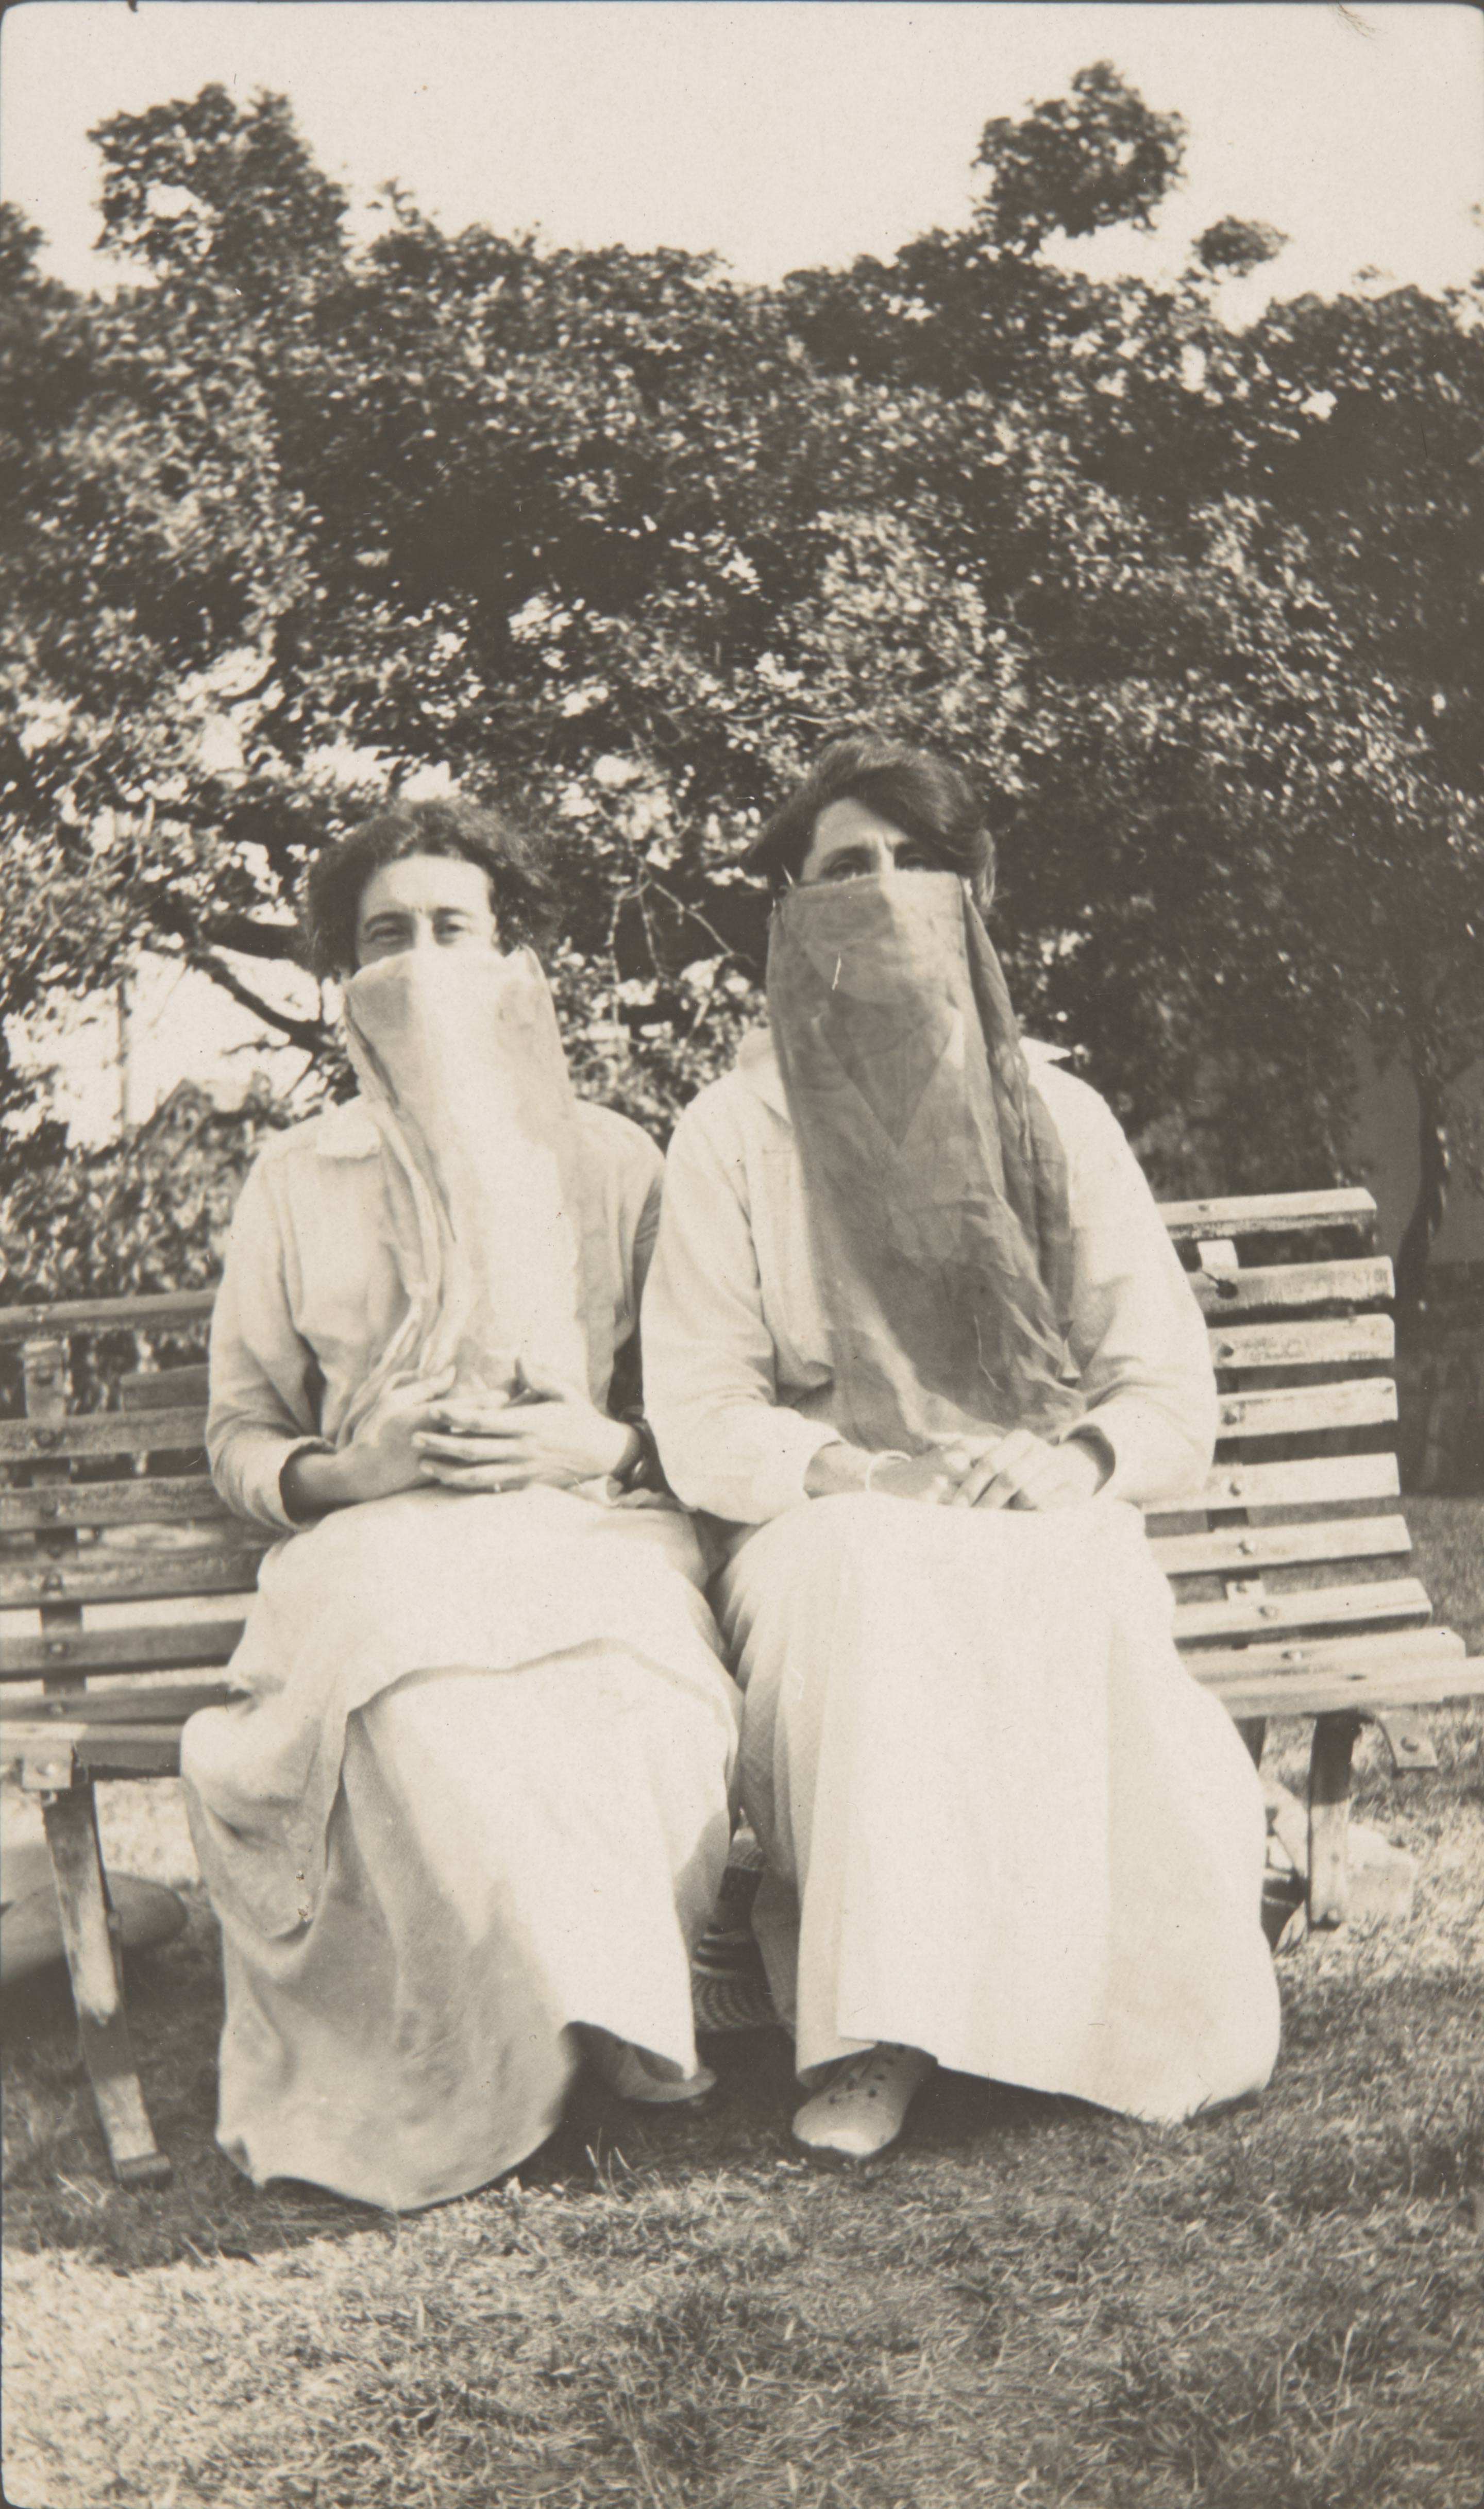 Two women wearing face scarves sitting on a park bench during the Spanish flu pandemic, 1918